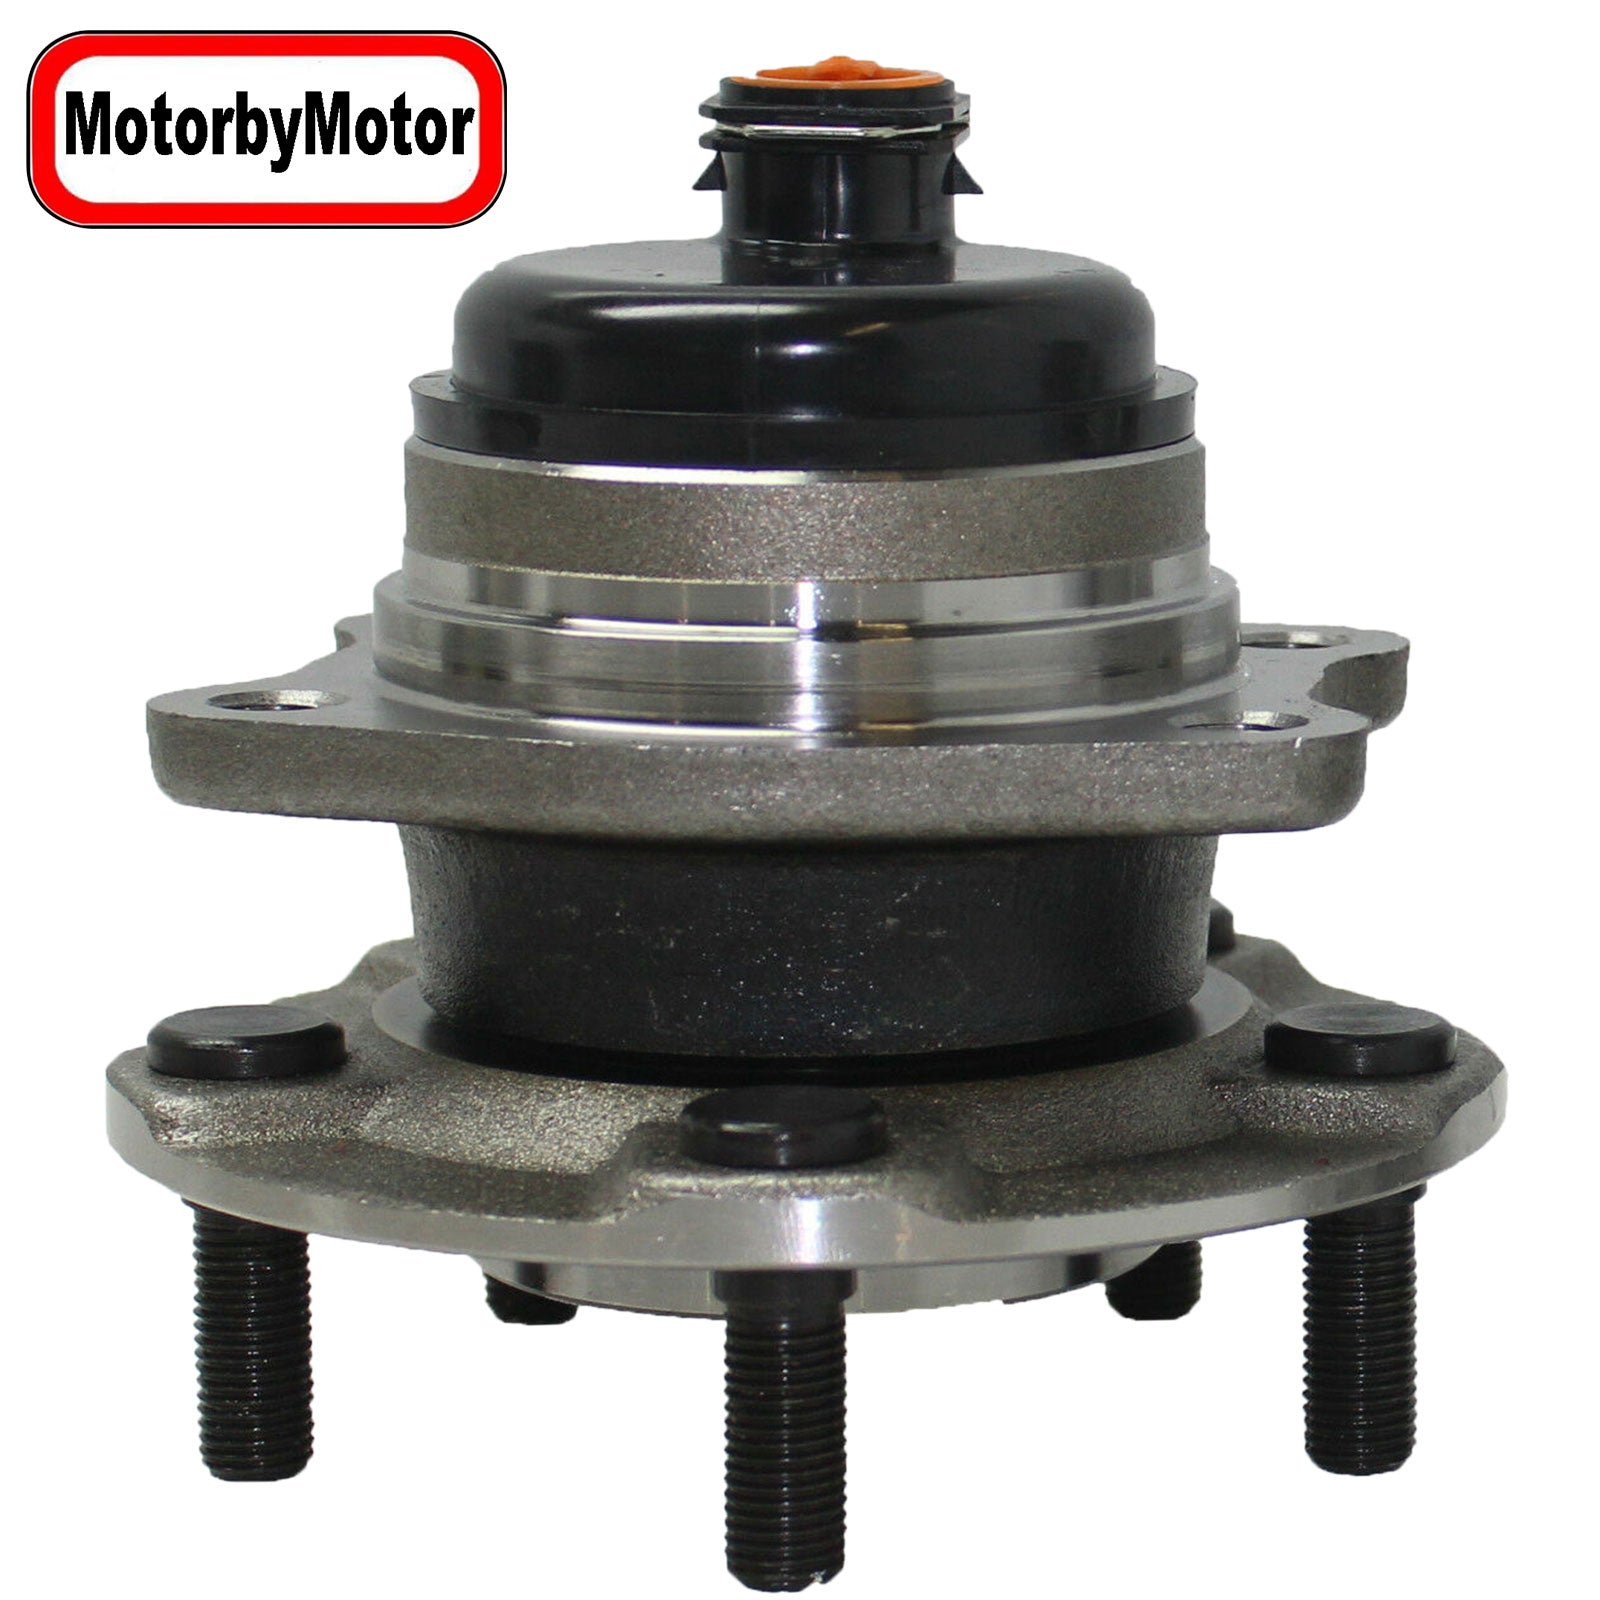 MotorbyMotor 512169 Rear Wheel Bearing & Hub Assembly with 5 Lugs, Dodge Caravan Grand Caravan, Chrysler Town & Country Voyager Low-Runout OE Replacement (2WD FWD, w/ABS) MotorbyMotor